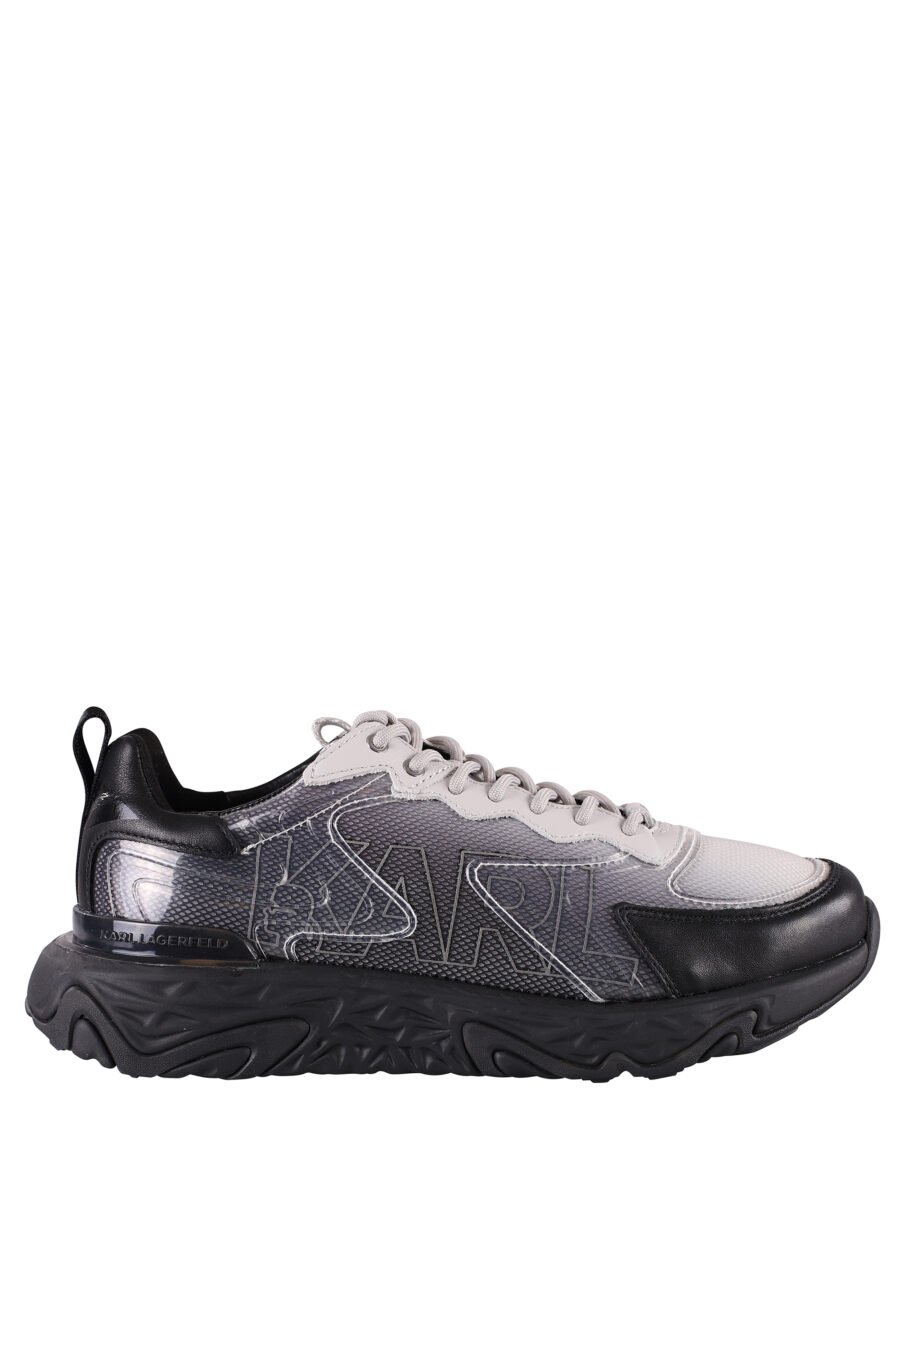 Black "blaze" trainers with white and transparent details - IMG 8477